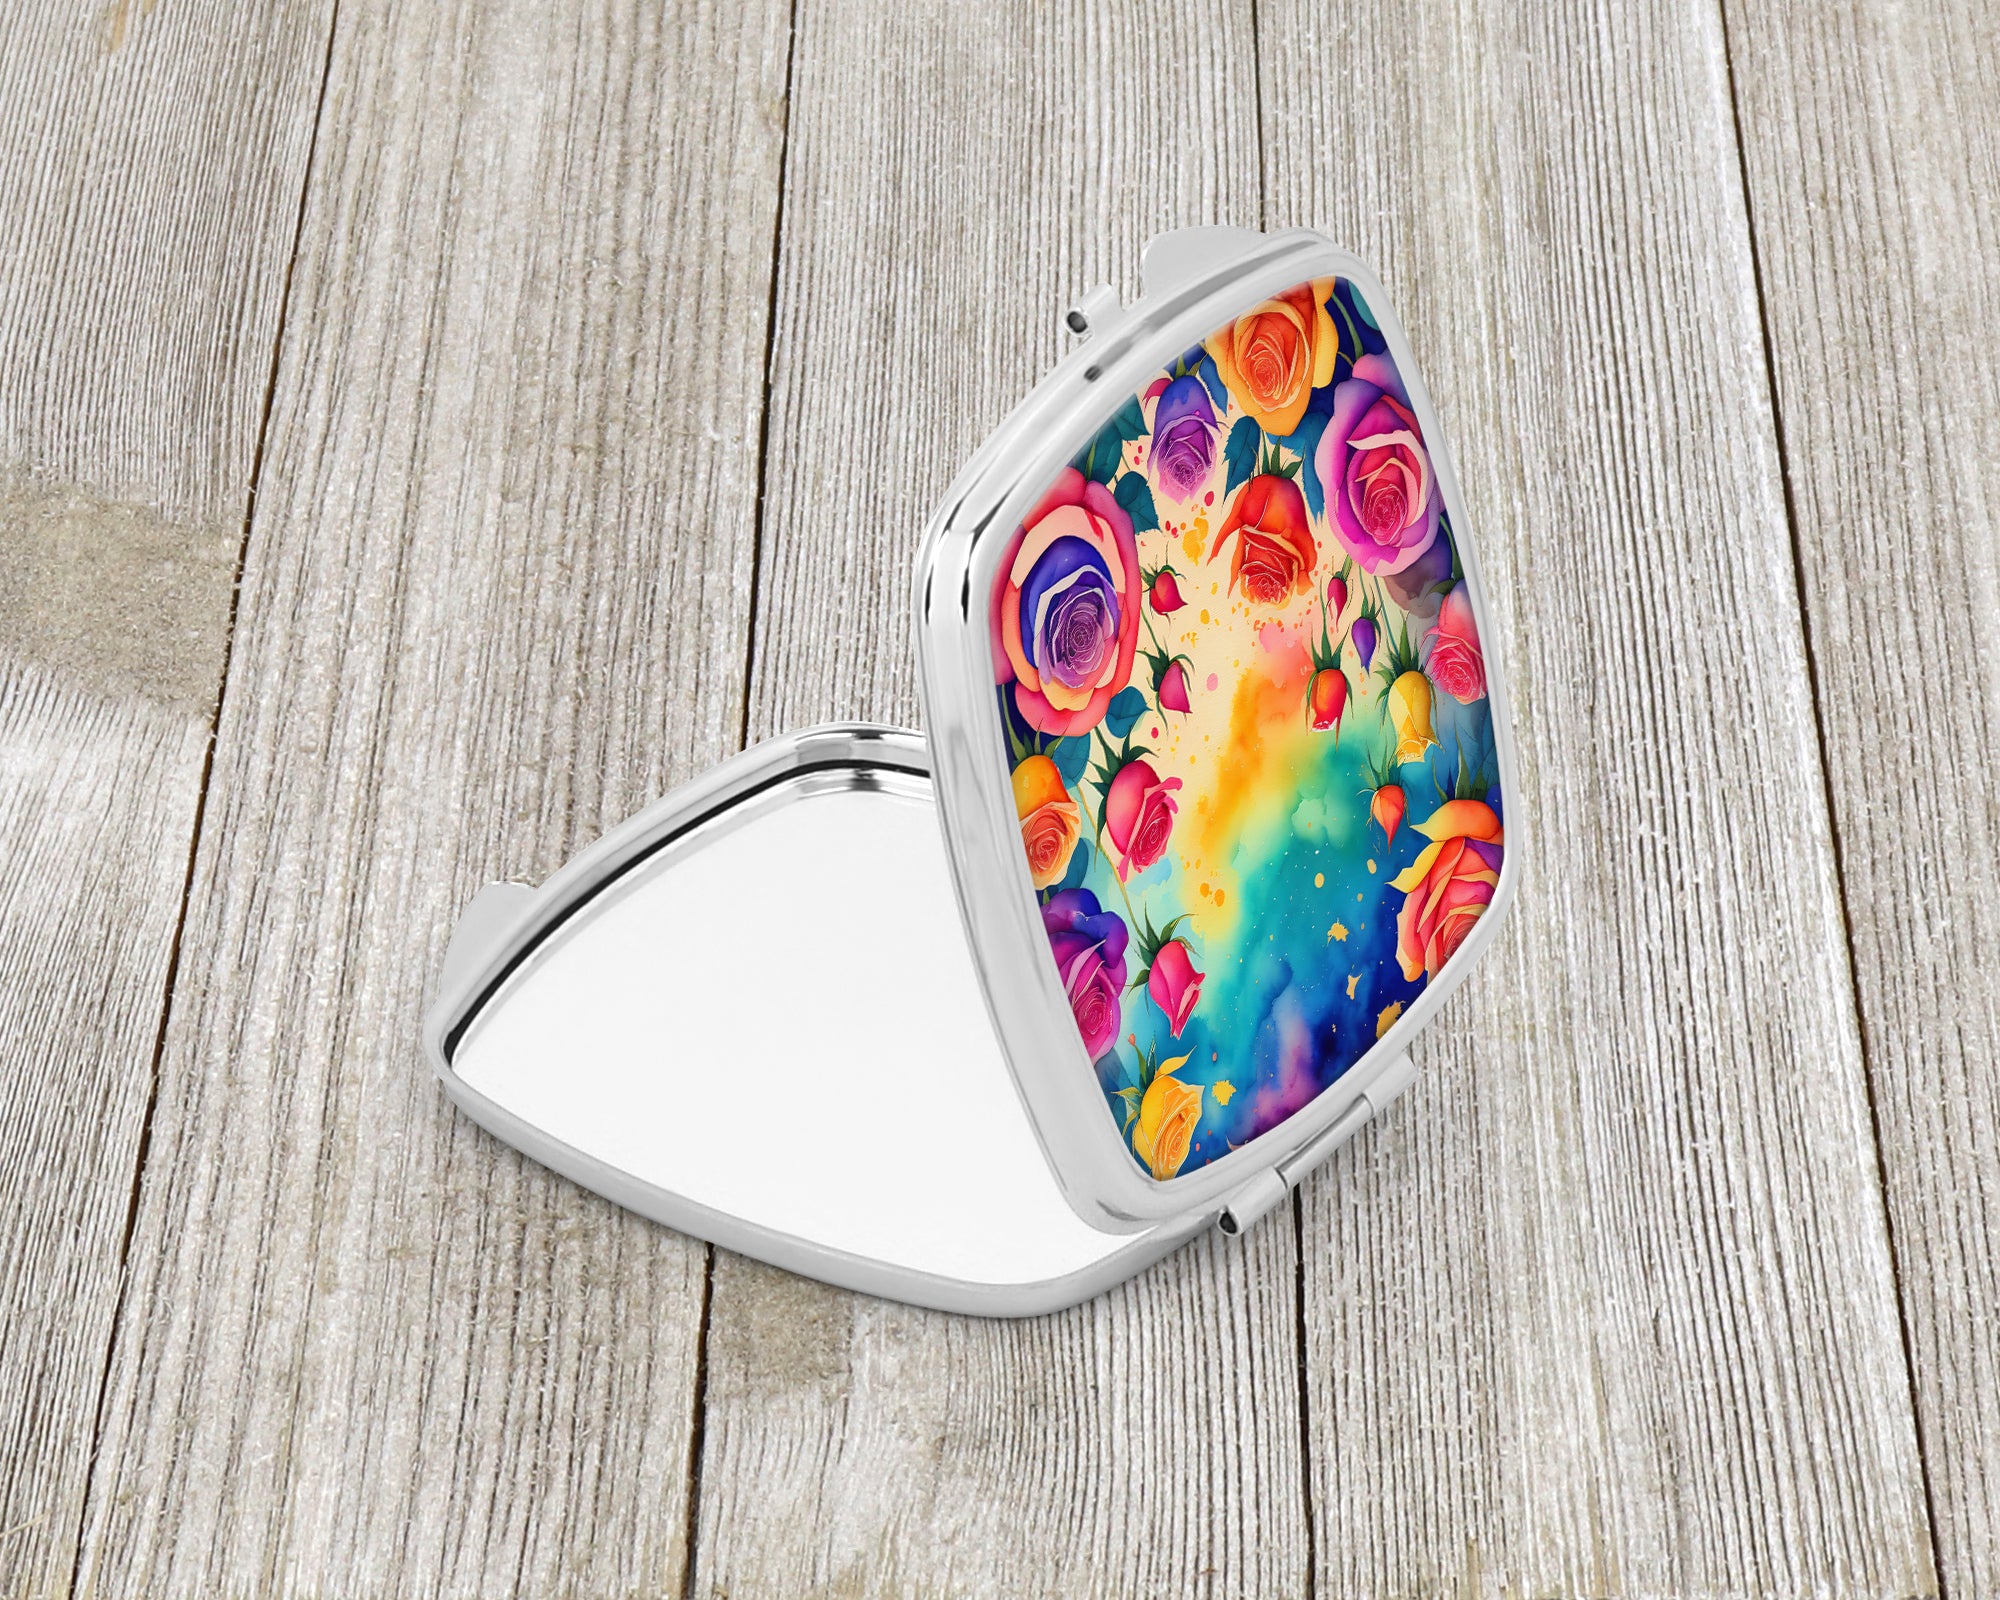 Buy this Colorful Roses Compact Mirror